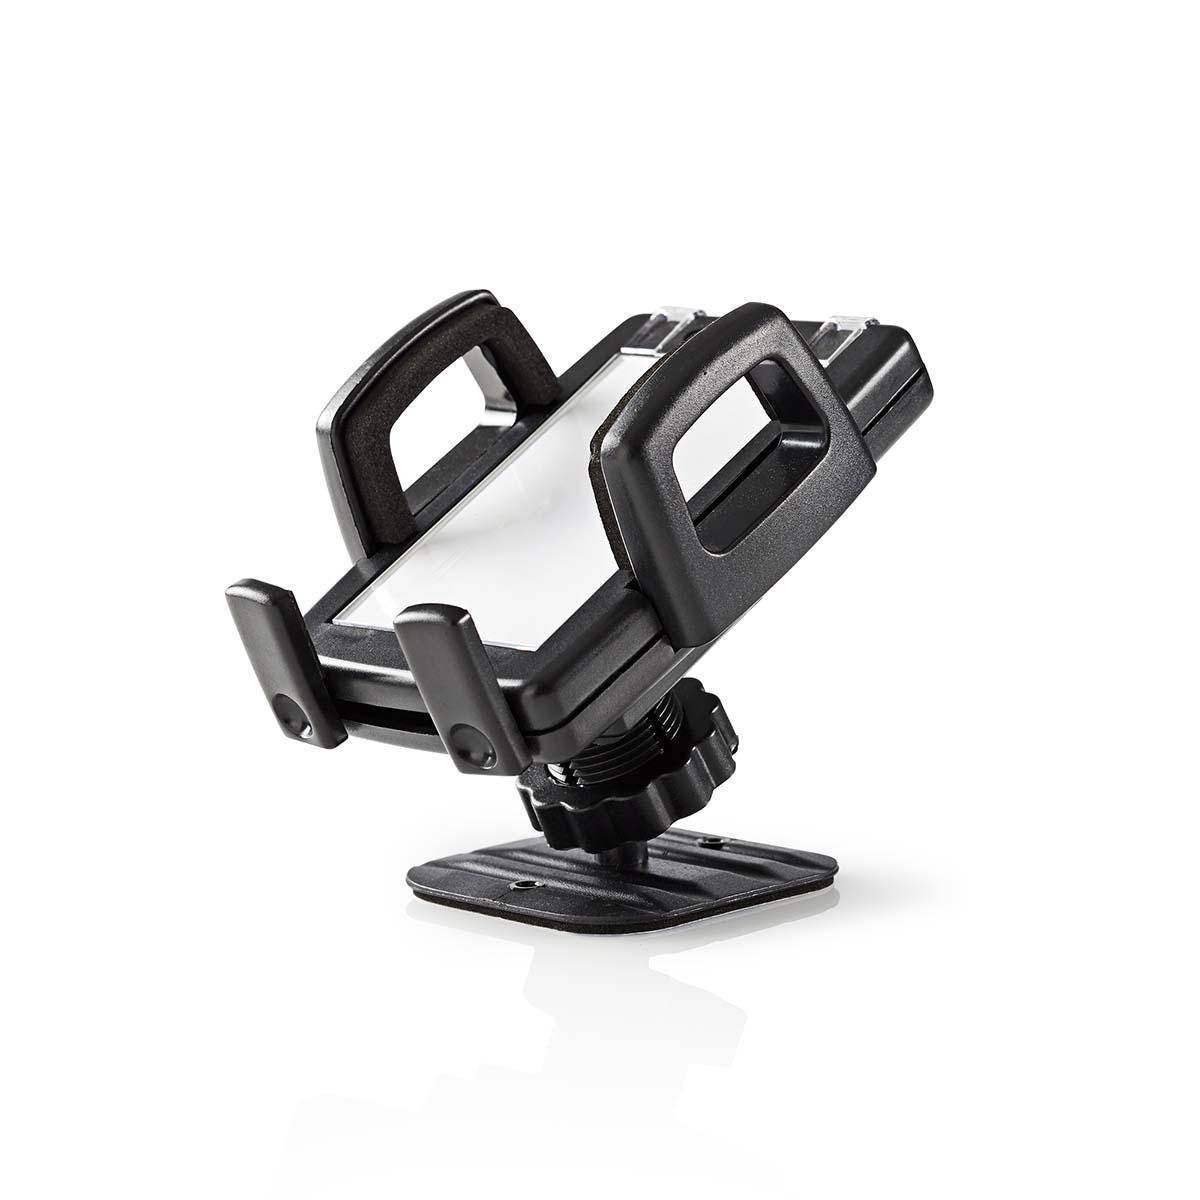 Smartphone Car Mount 3 in 1 Air Vent / Suction Cup / Sticker